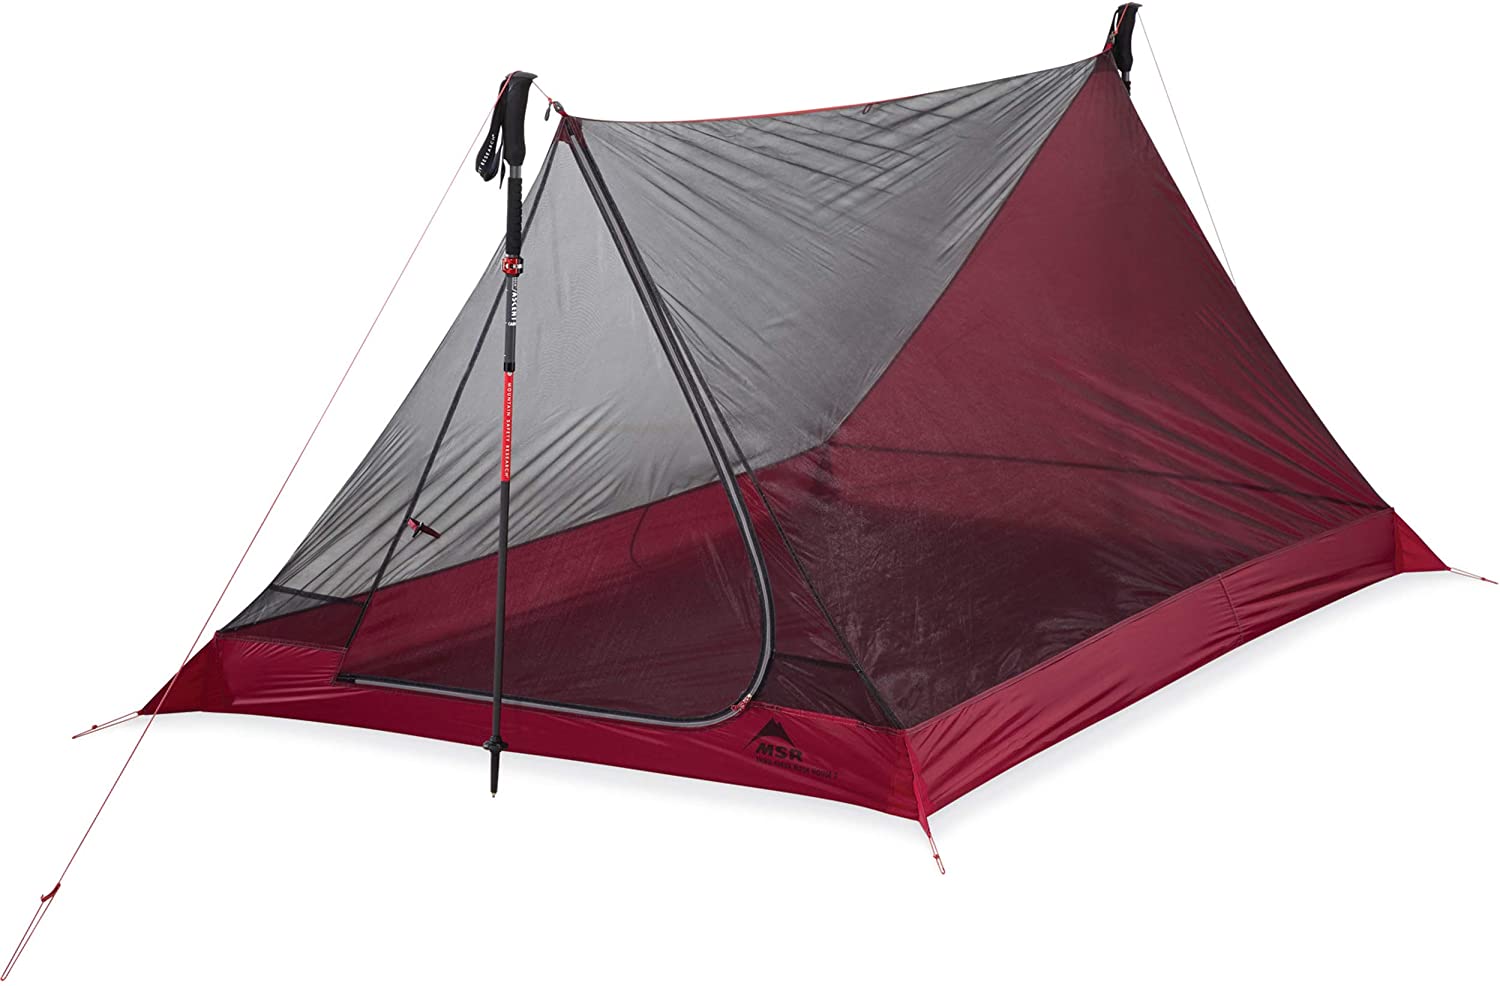 Ultralight Backpacking Tents For One Person